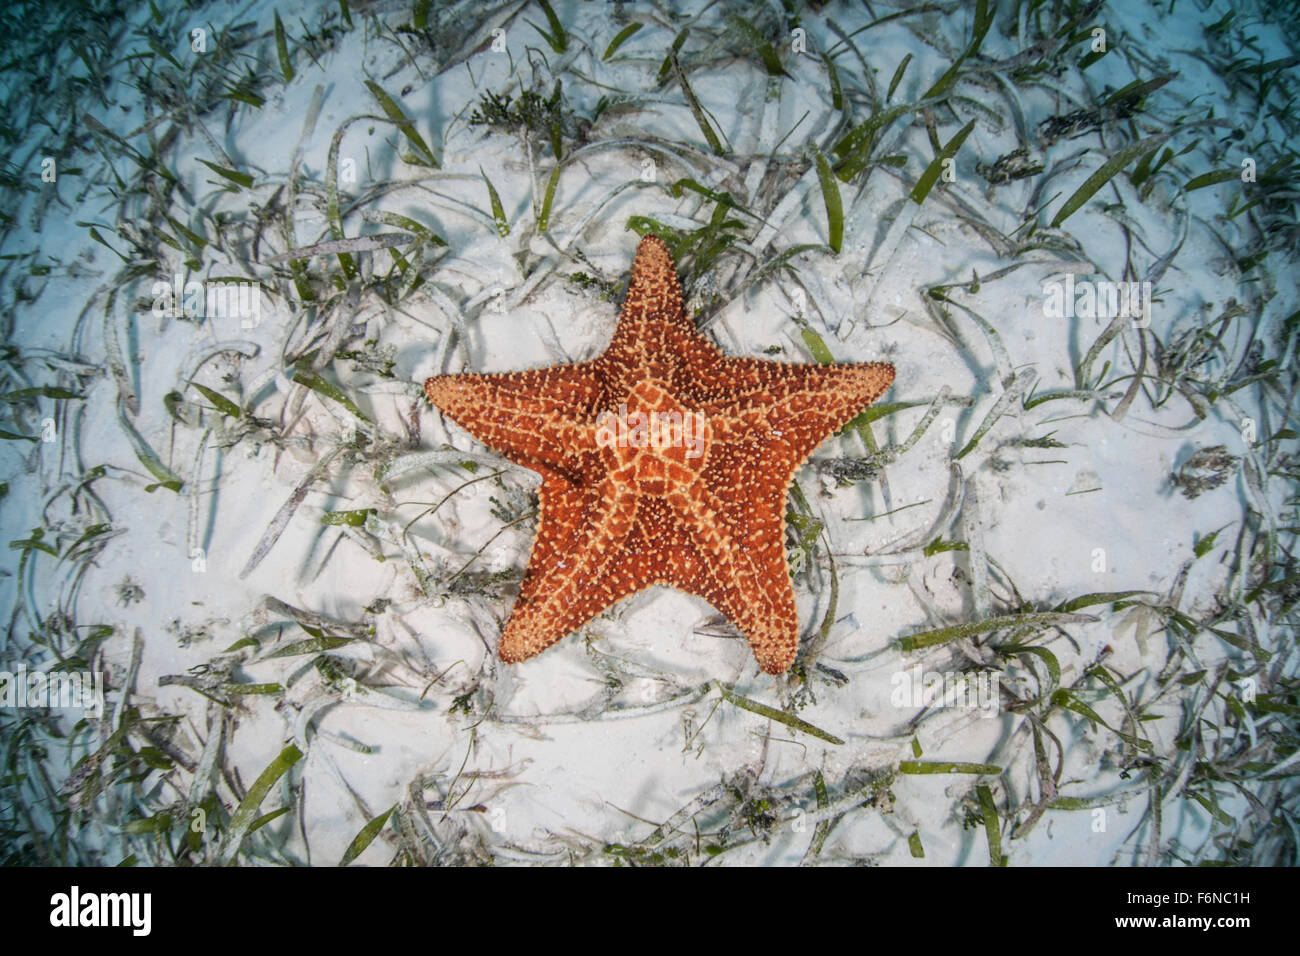 A West Indian starfish (Oreaster reticulatus) crawls slowly across a sand and seagrass seafloor in Turneffe Atoll, Belize. This Stock Photo